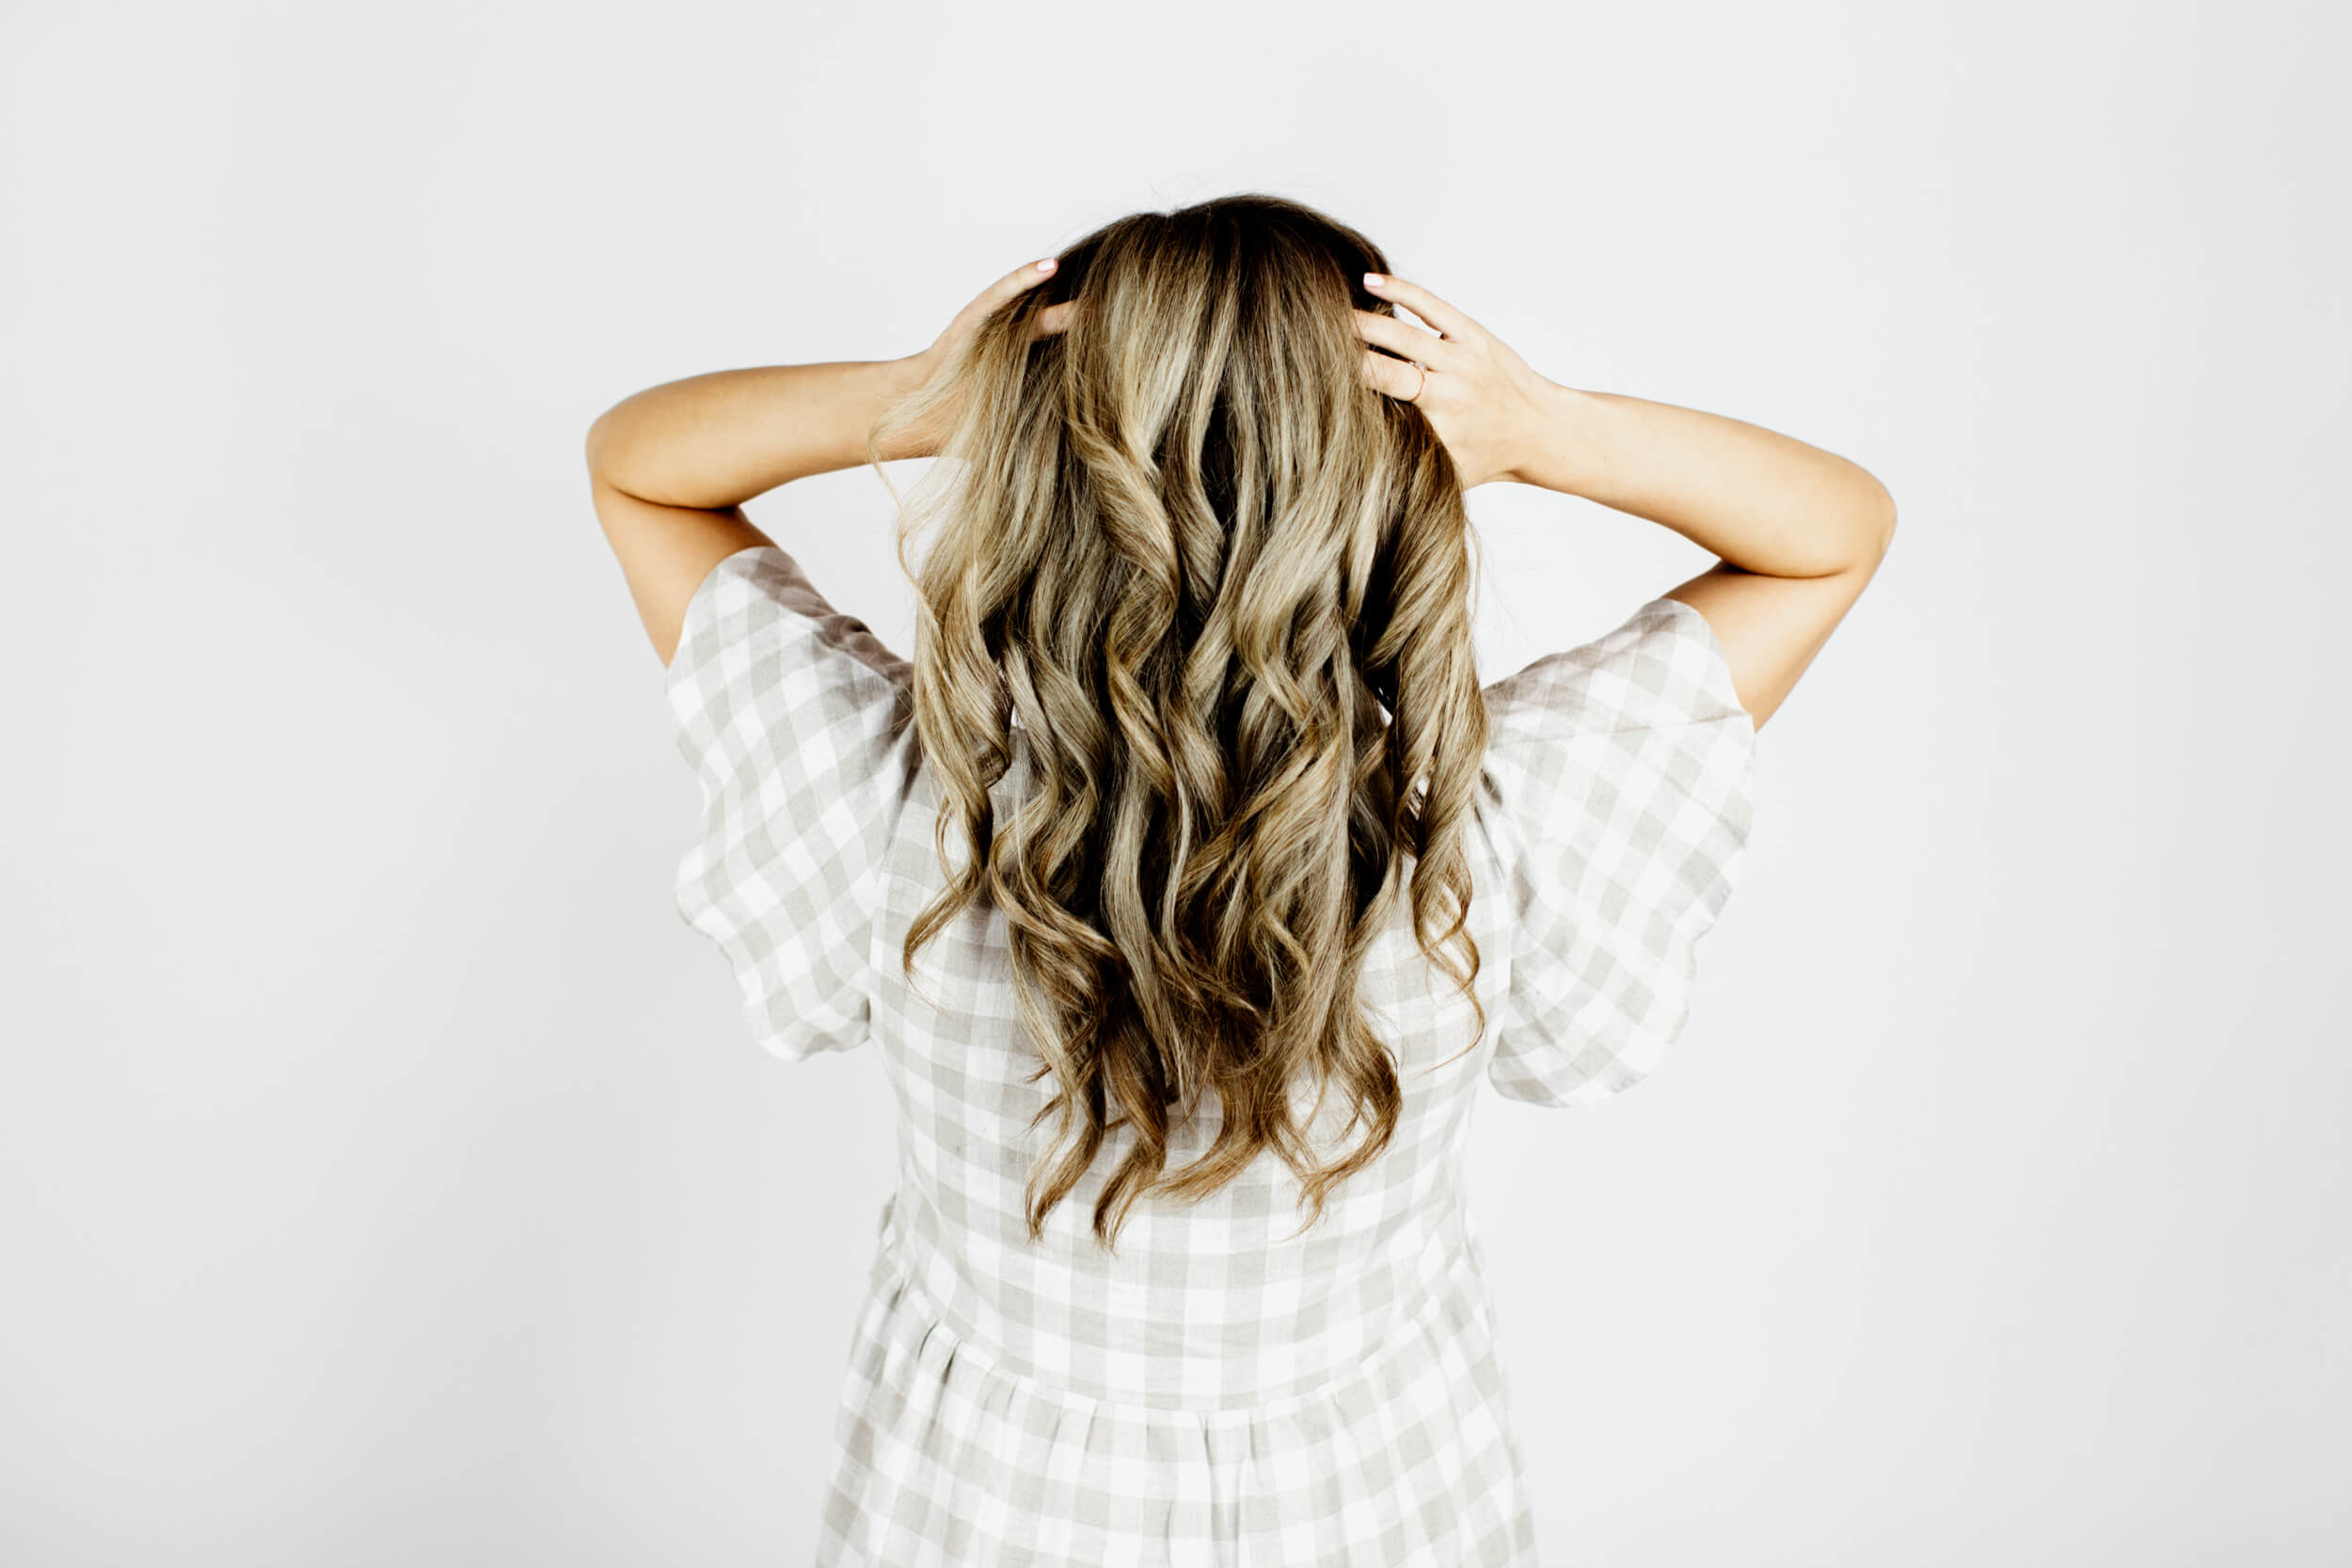 A head of curly blonde hair seen from the back.